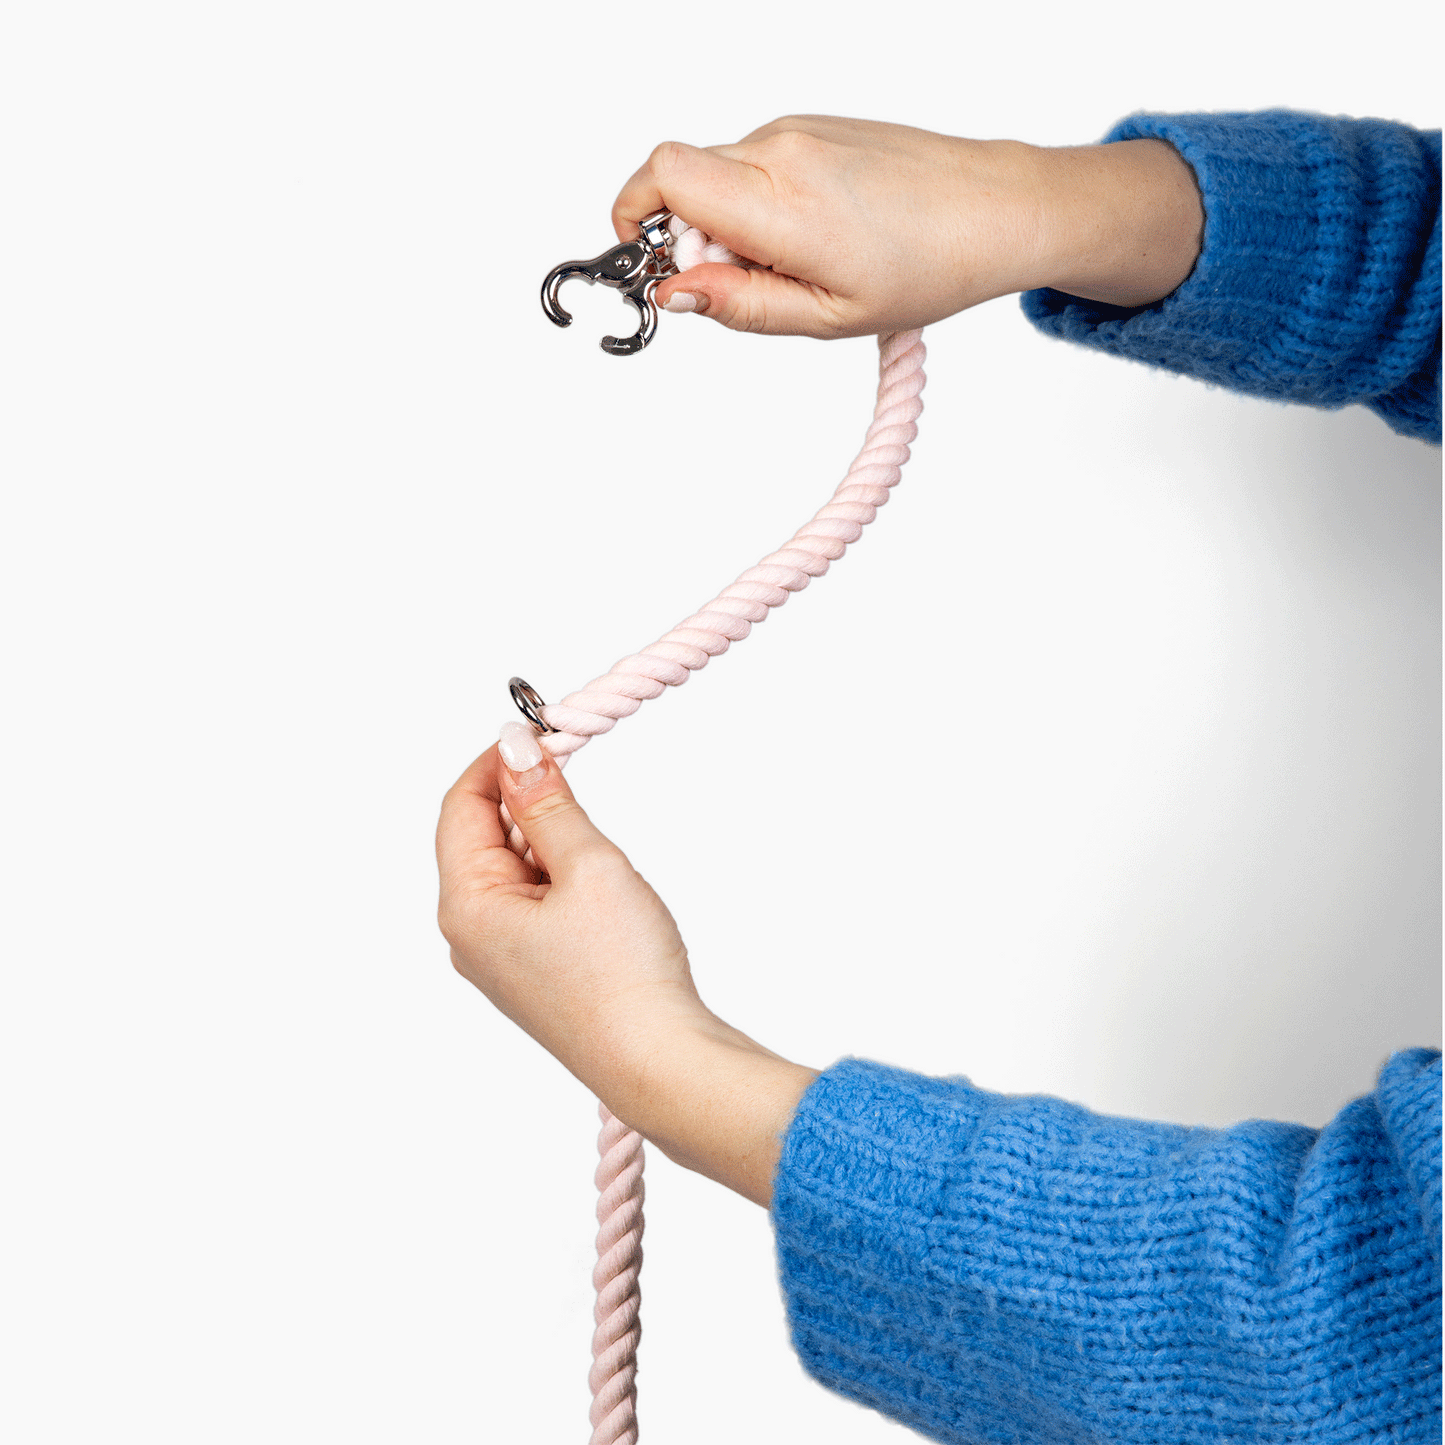 The Bolt of Energy Hands-Free Rope Leash